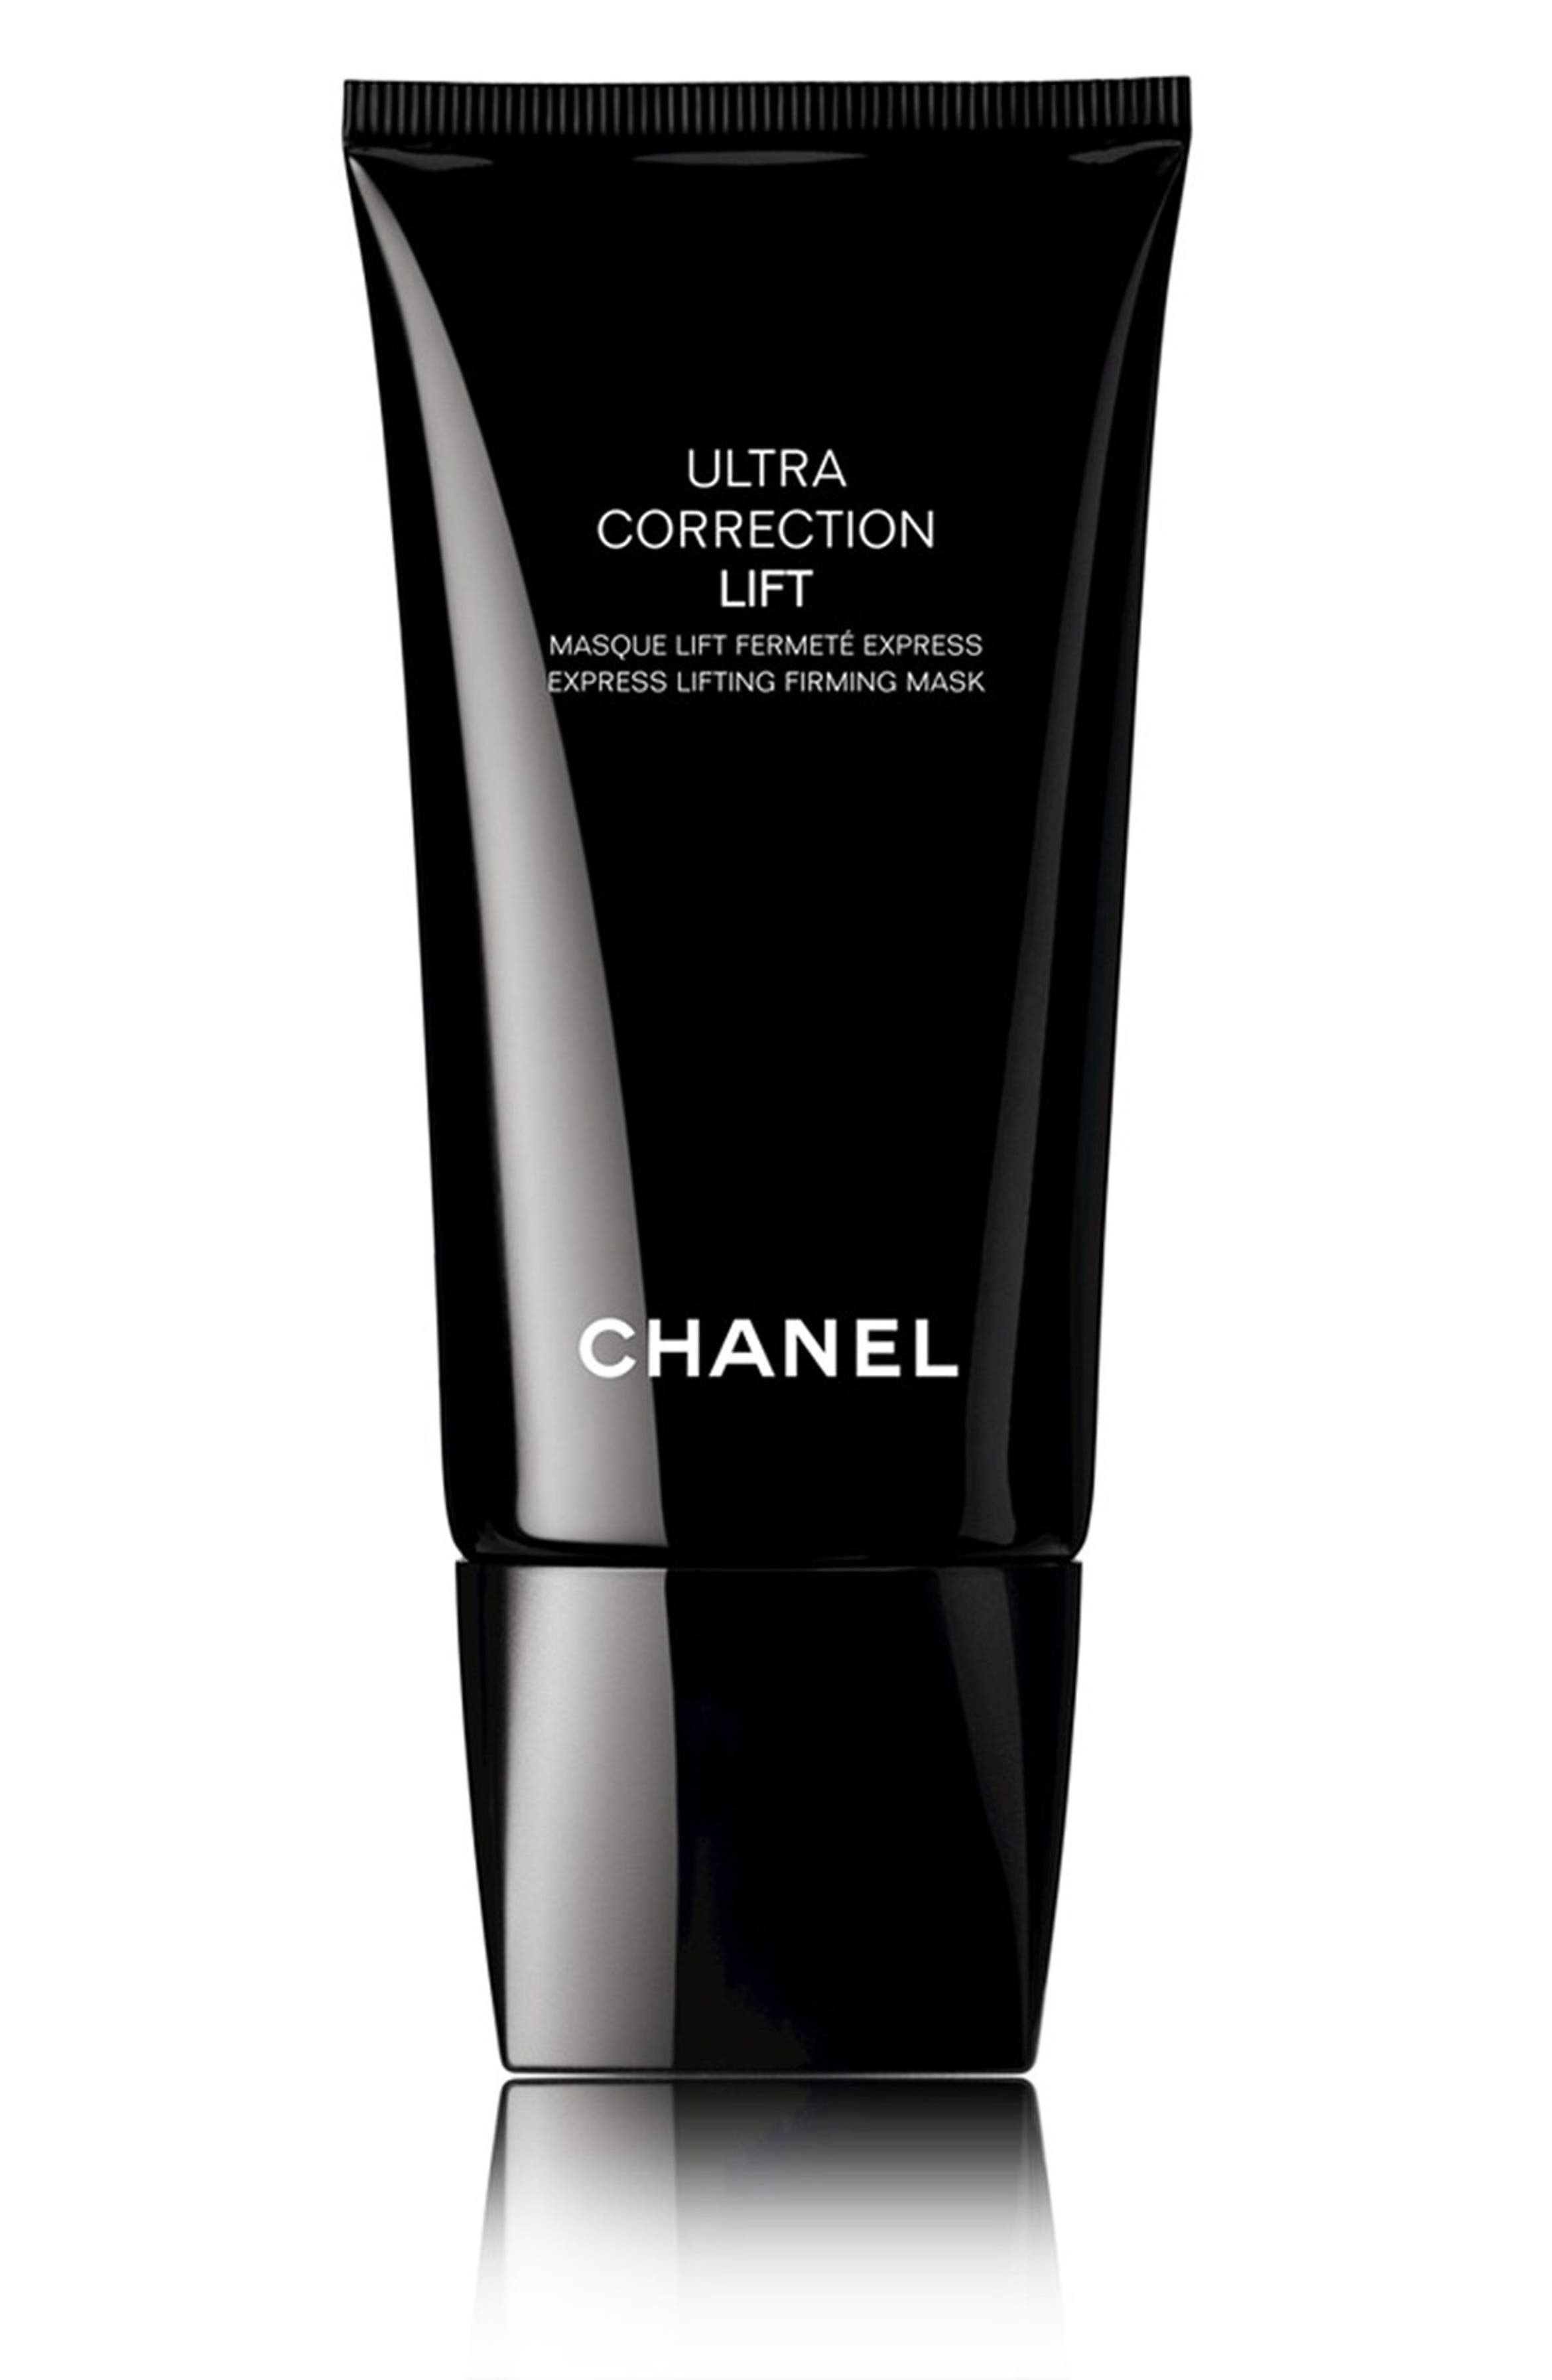 CHANEL ULTRA CORRECTION LIFT Express Lifting Firming Mask | Nordstrom